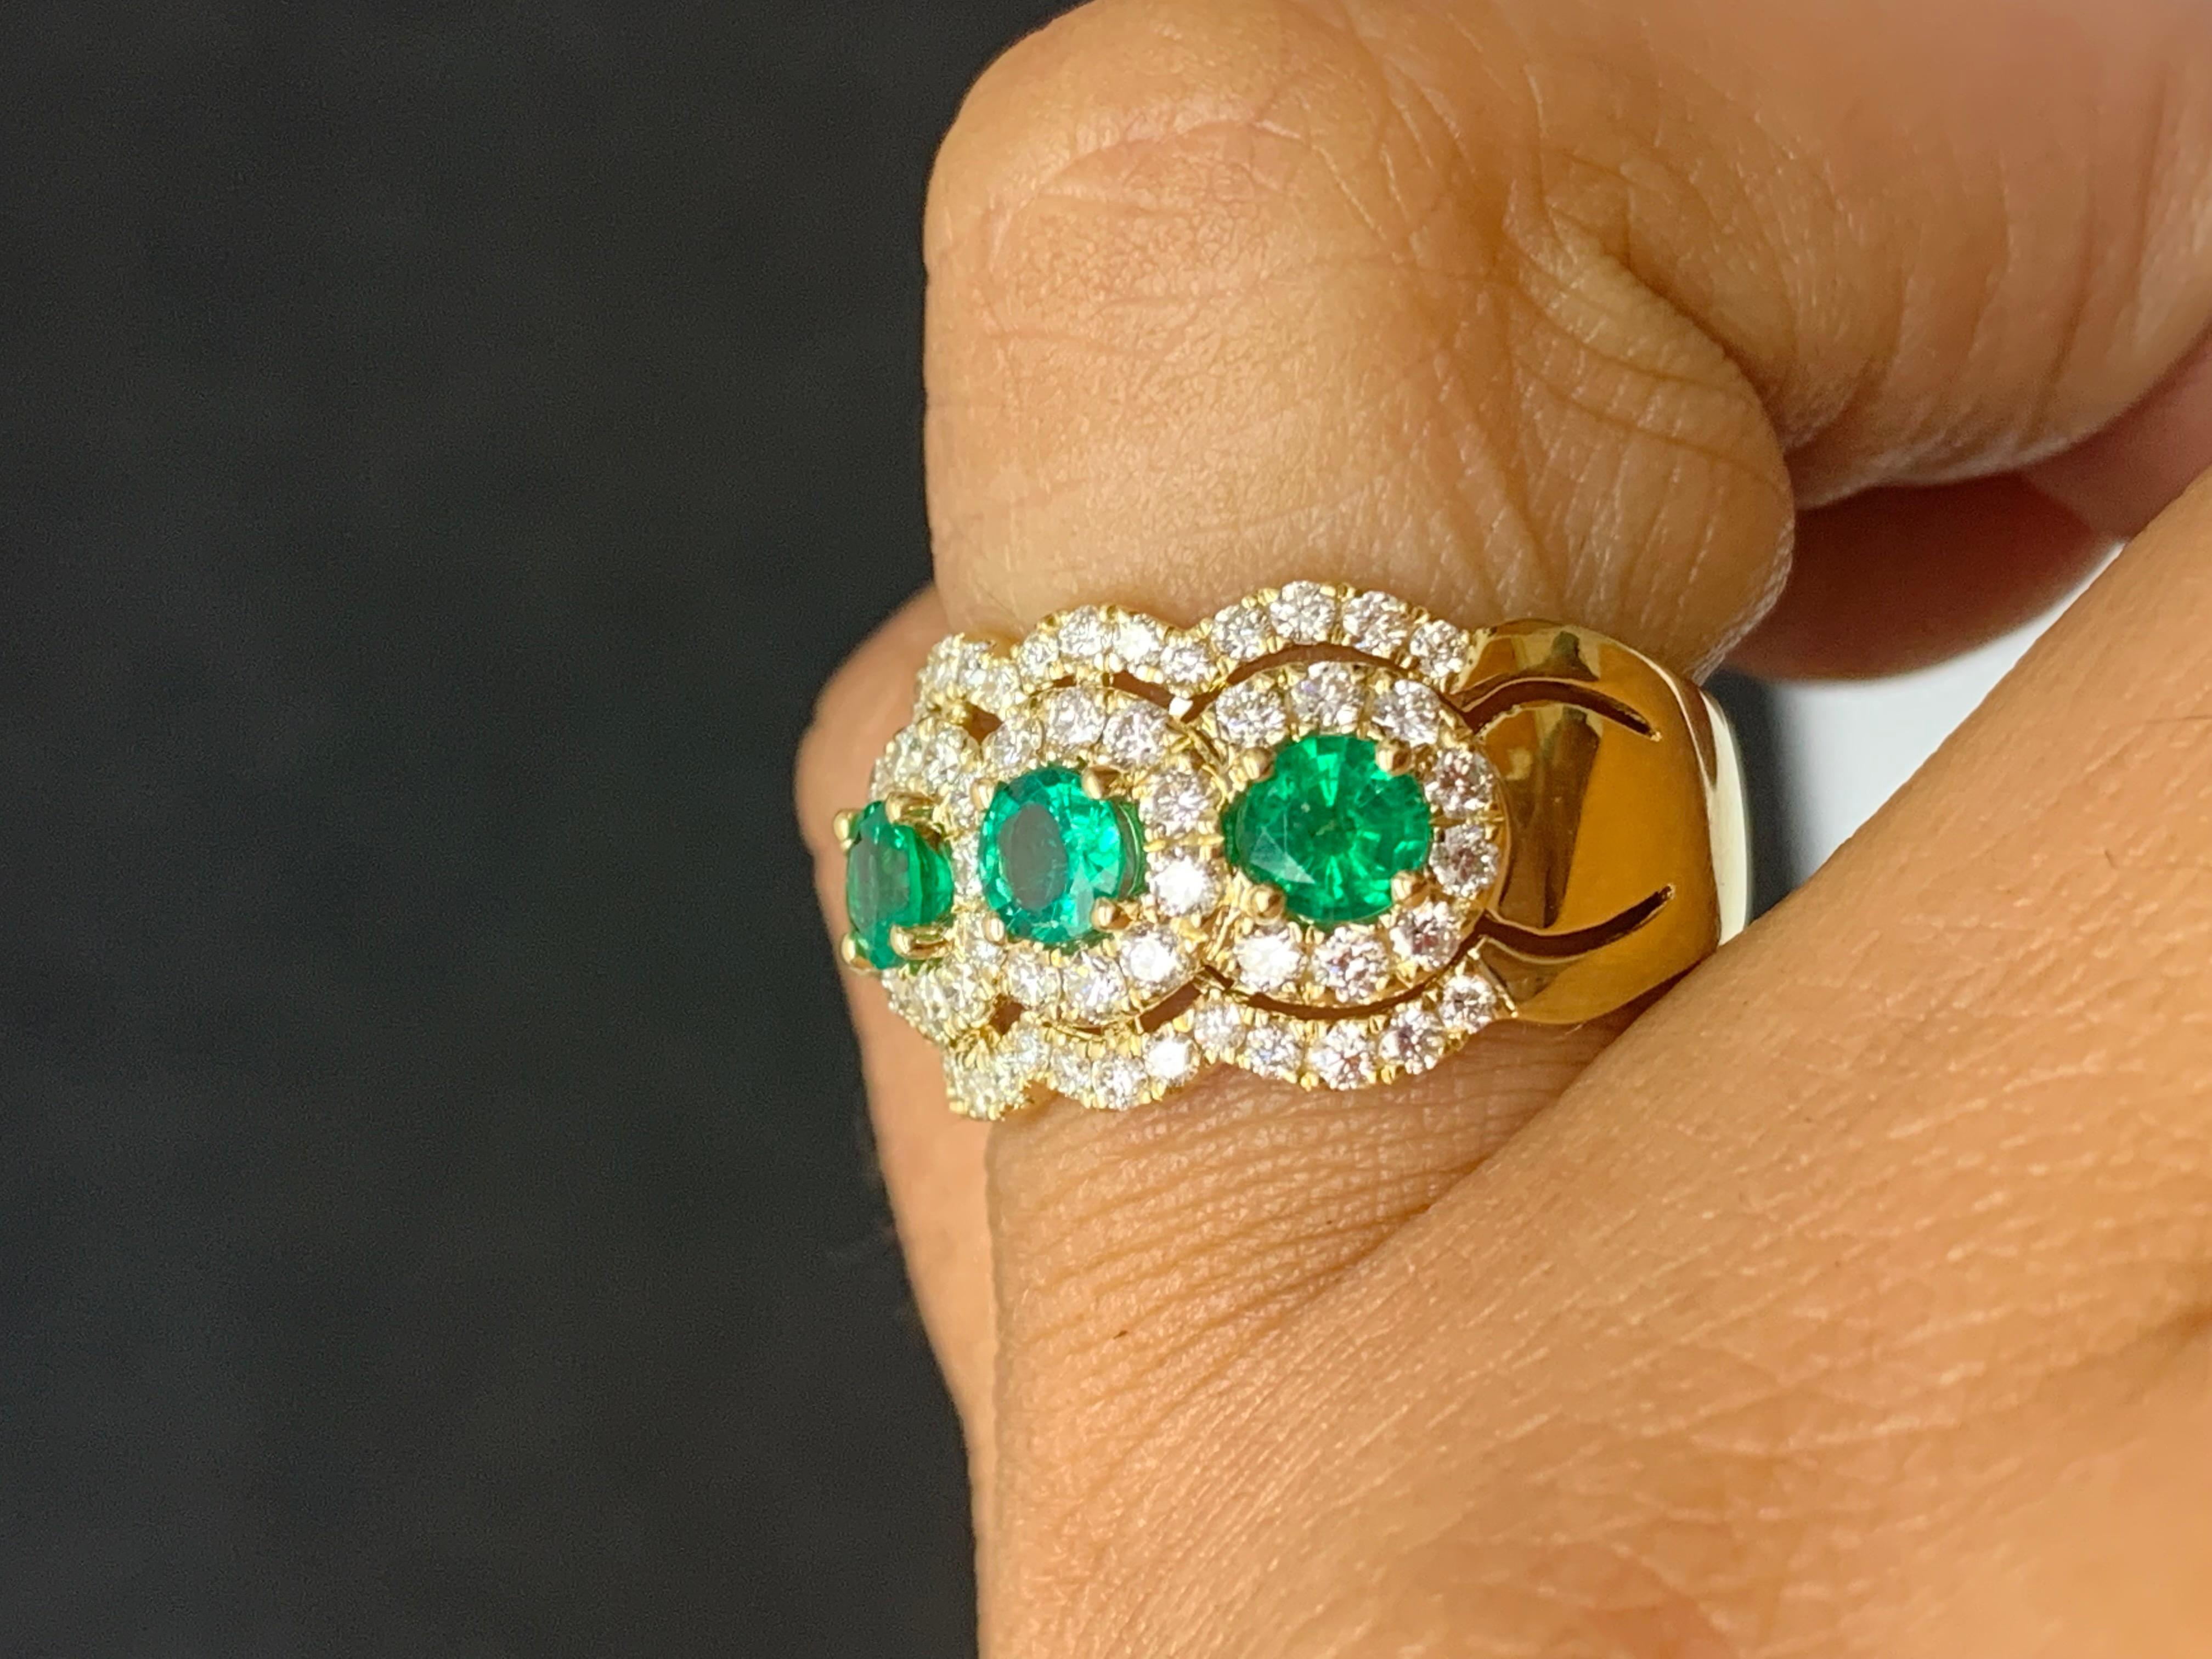 A magnificent and unique piece of jewelry showcasing fancy round cut 4 emeralds set in an open-work, floating diamond design made in 18K White gold. 4 Emeralds weigh 0.89 carats and 69 Diamonds weigh 1.01 carats in total. 

Size 6.5 US (Sizable).